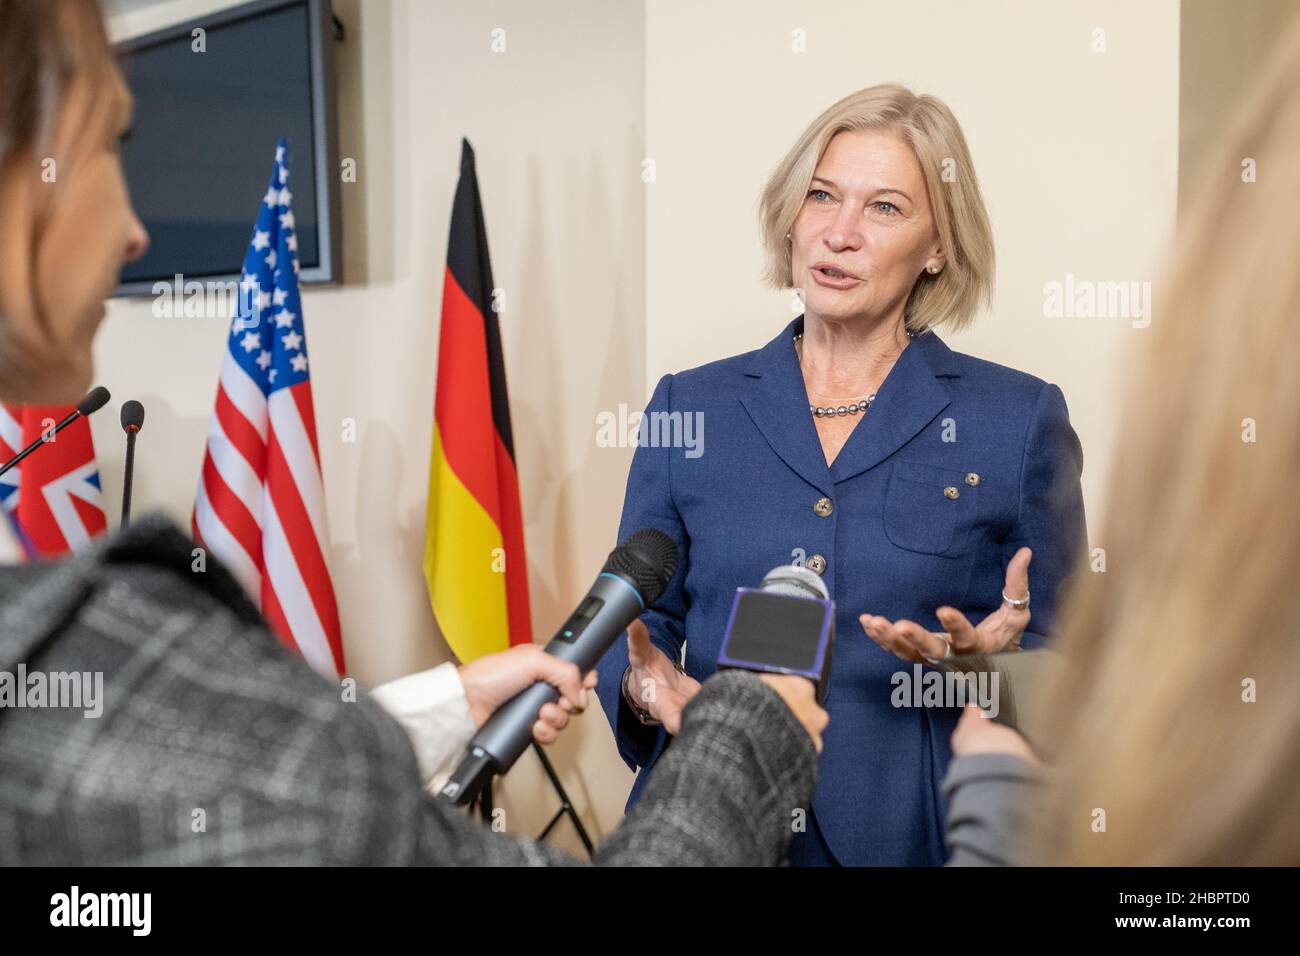 Contemporary female politician in formalwear giving interview to journalists at press conference against national flags Stock Photo